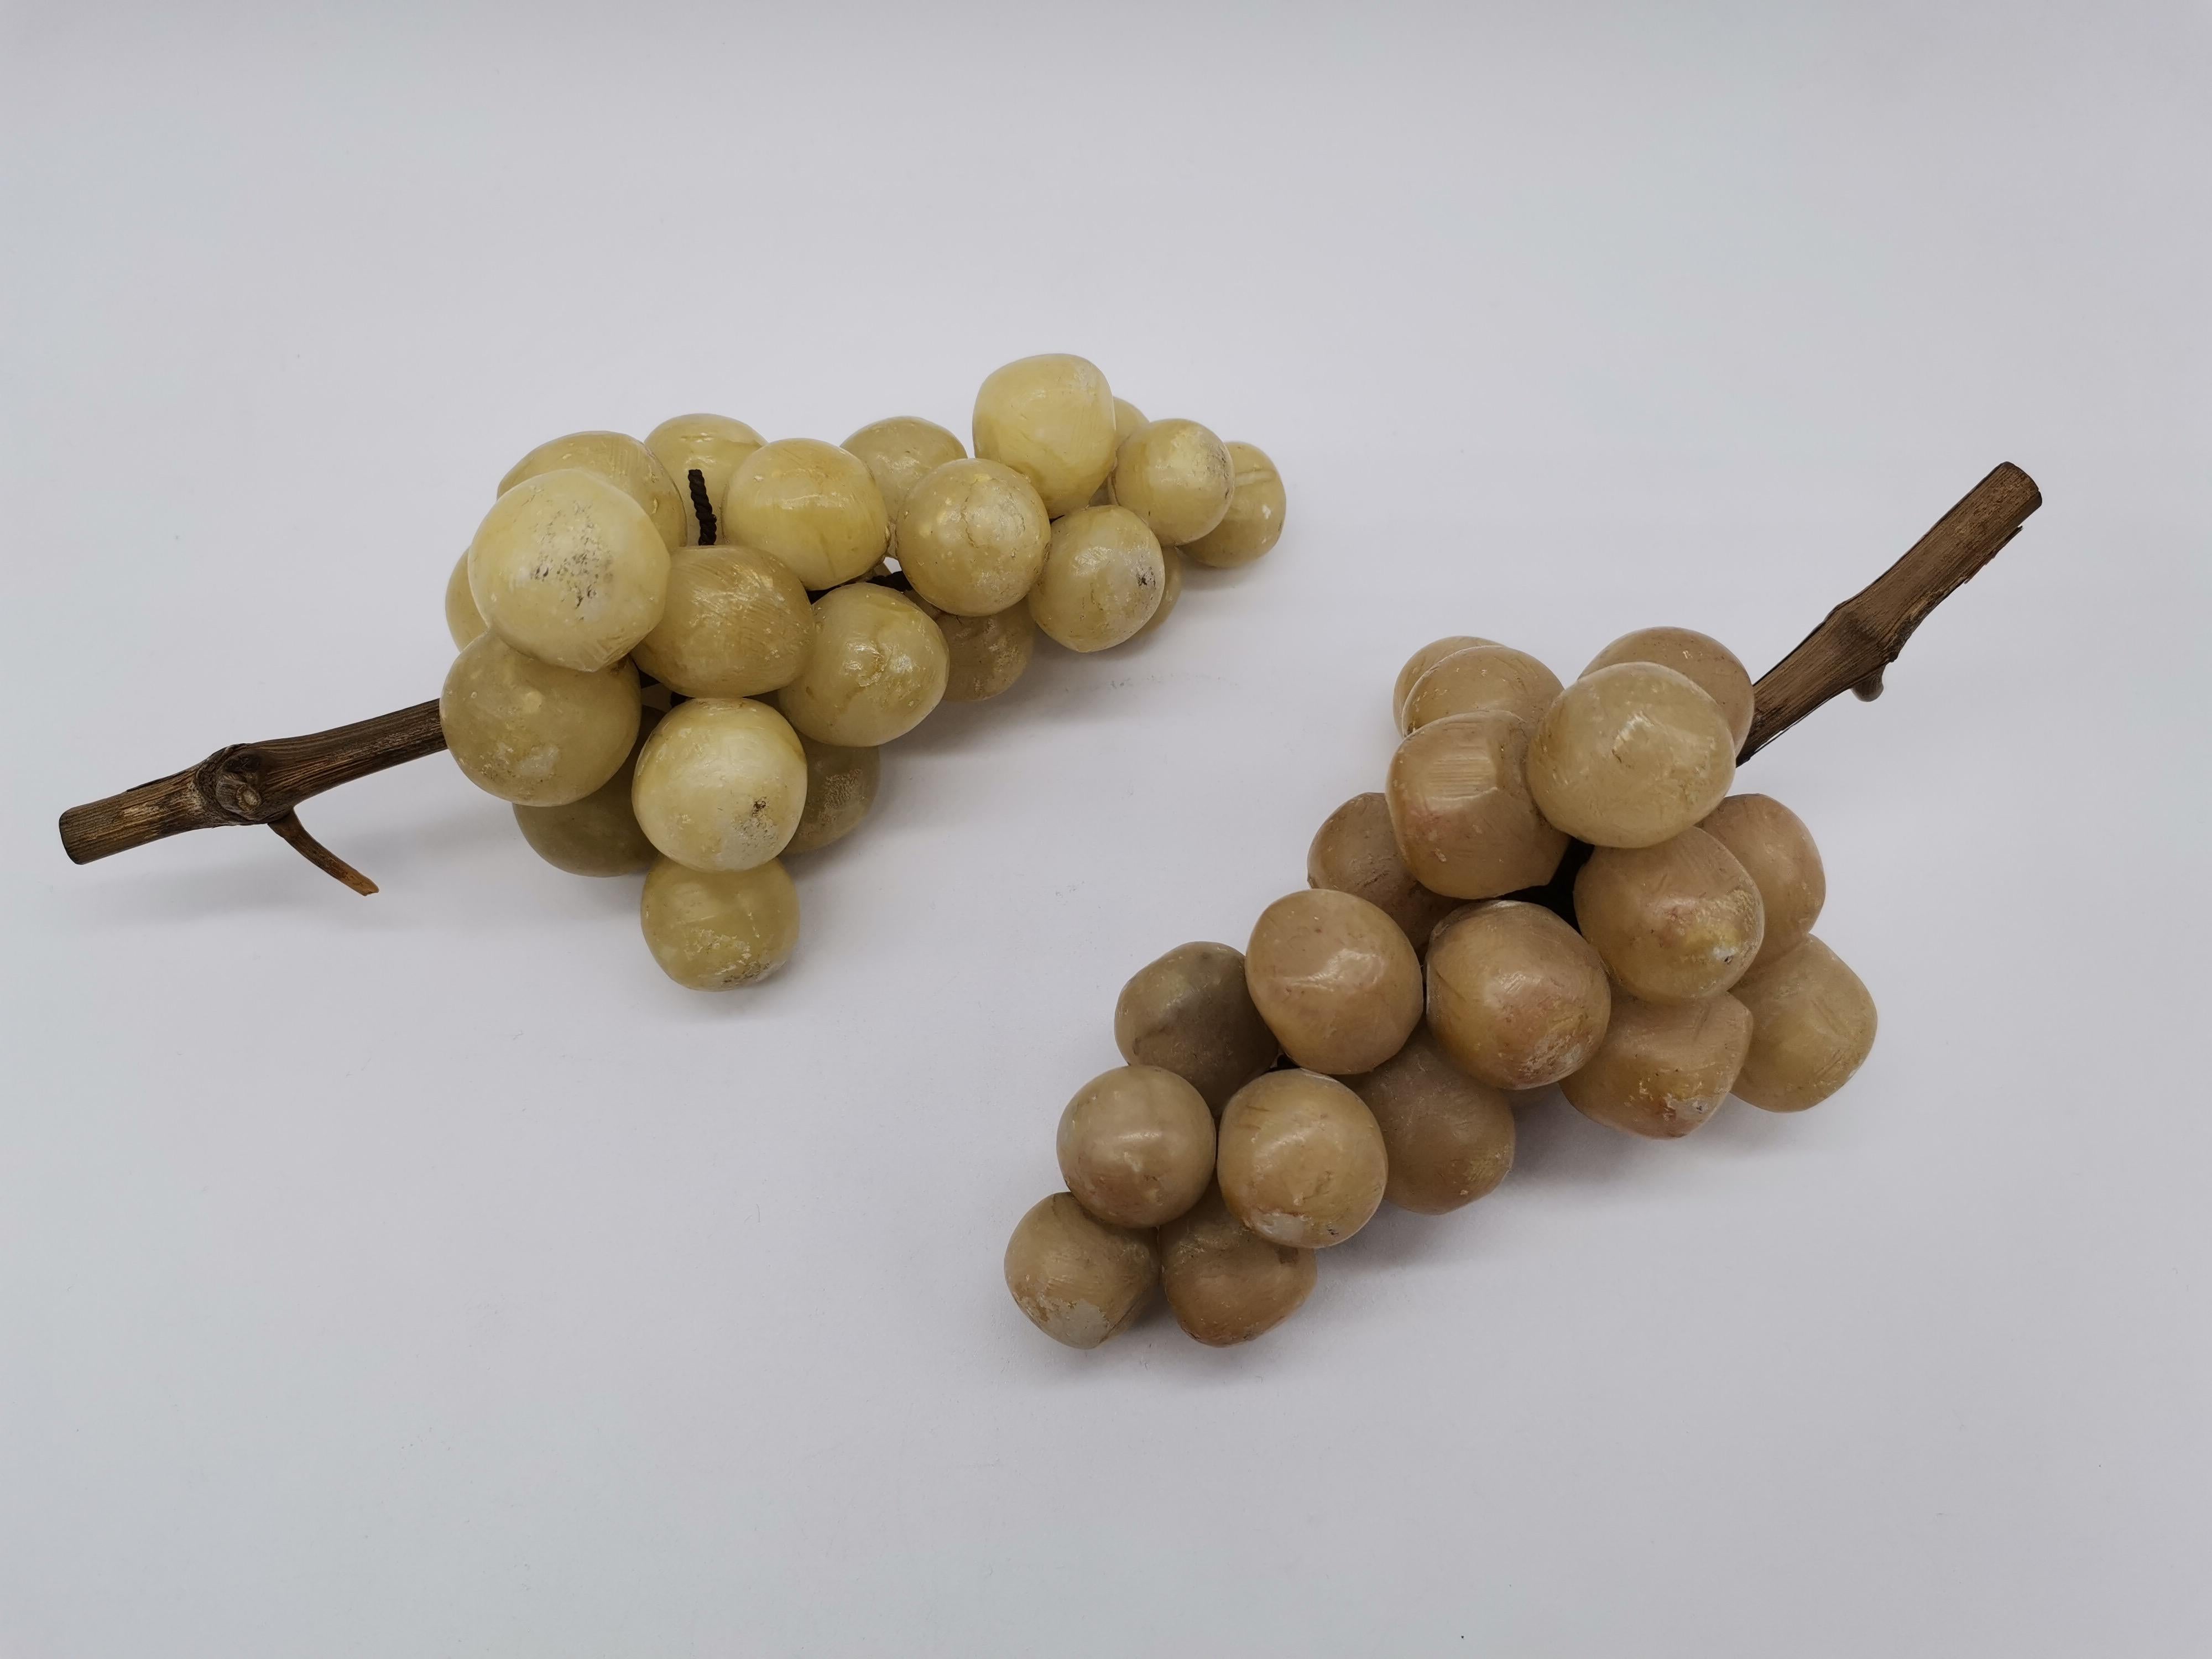 Two vines of grapes. One is a little brighter than the other. Made of alabaster and wood.